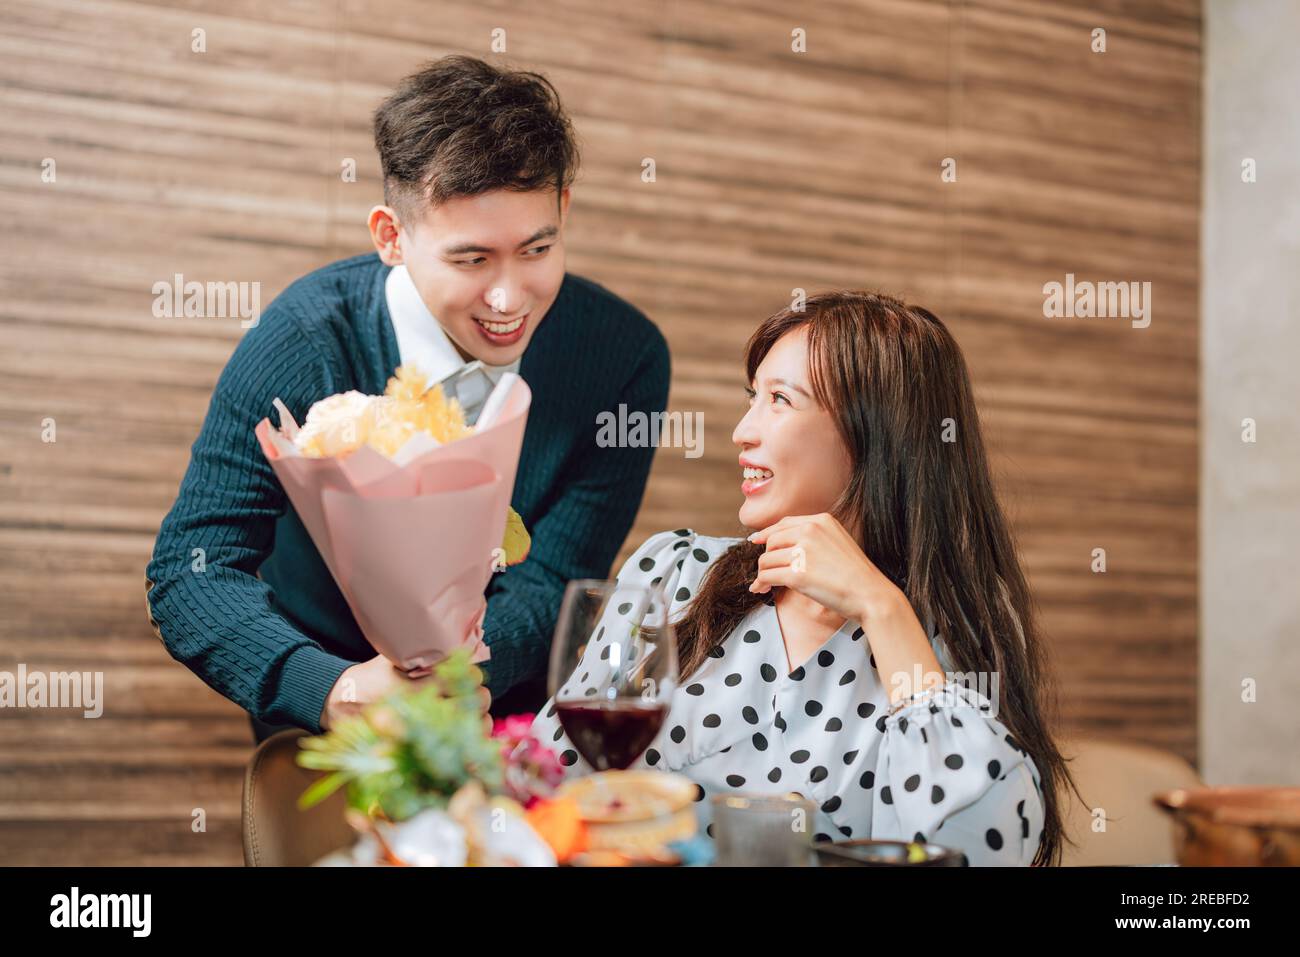 Young man greeting his girlfriend on Valentine's Day at restaurant Stock Photo